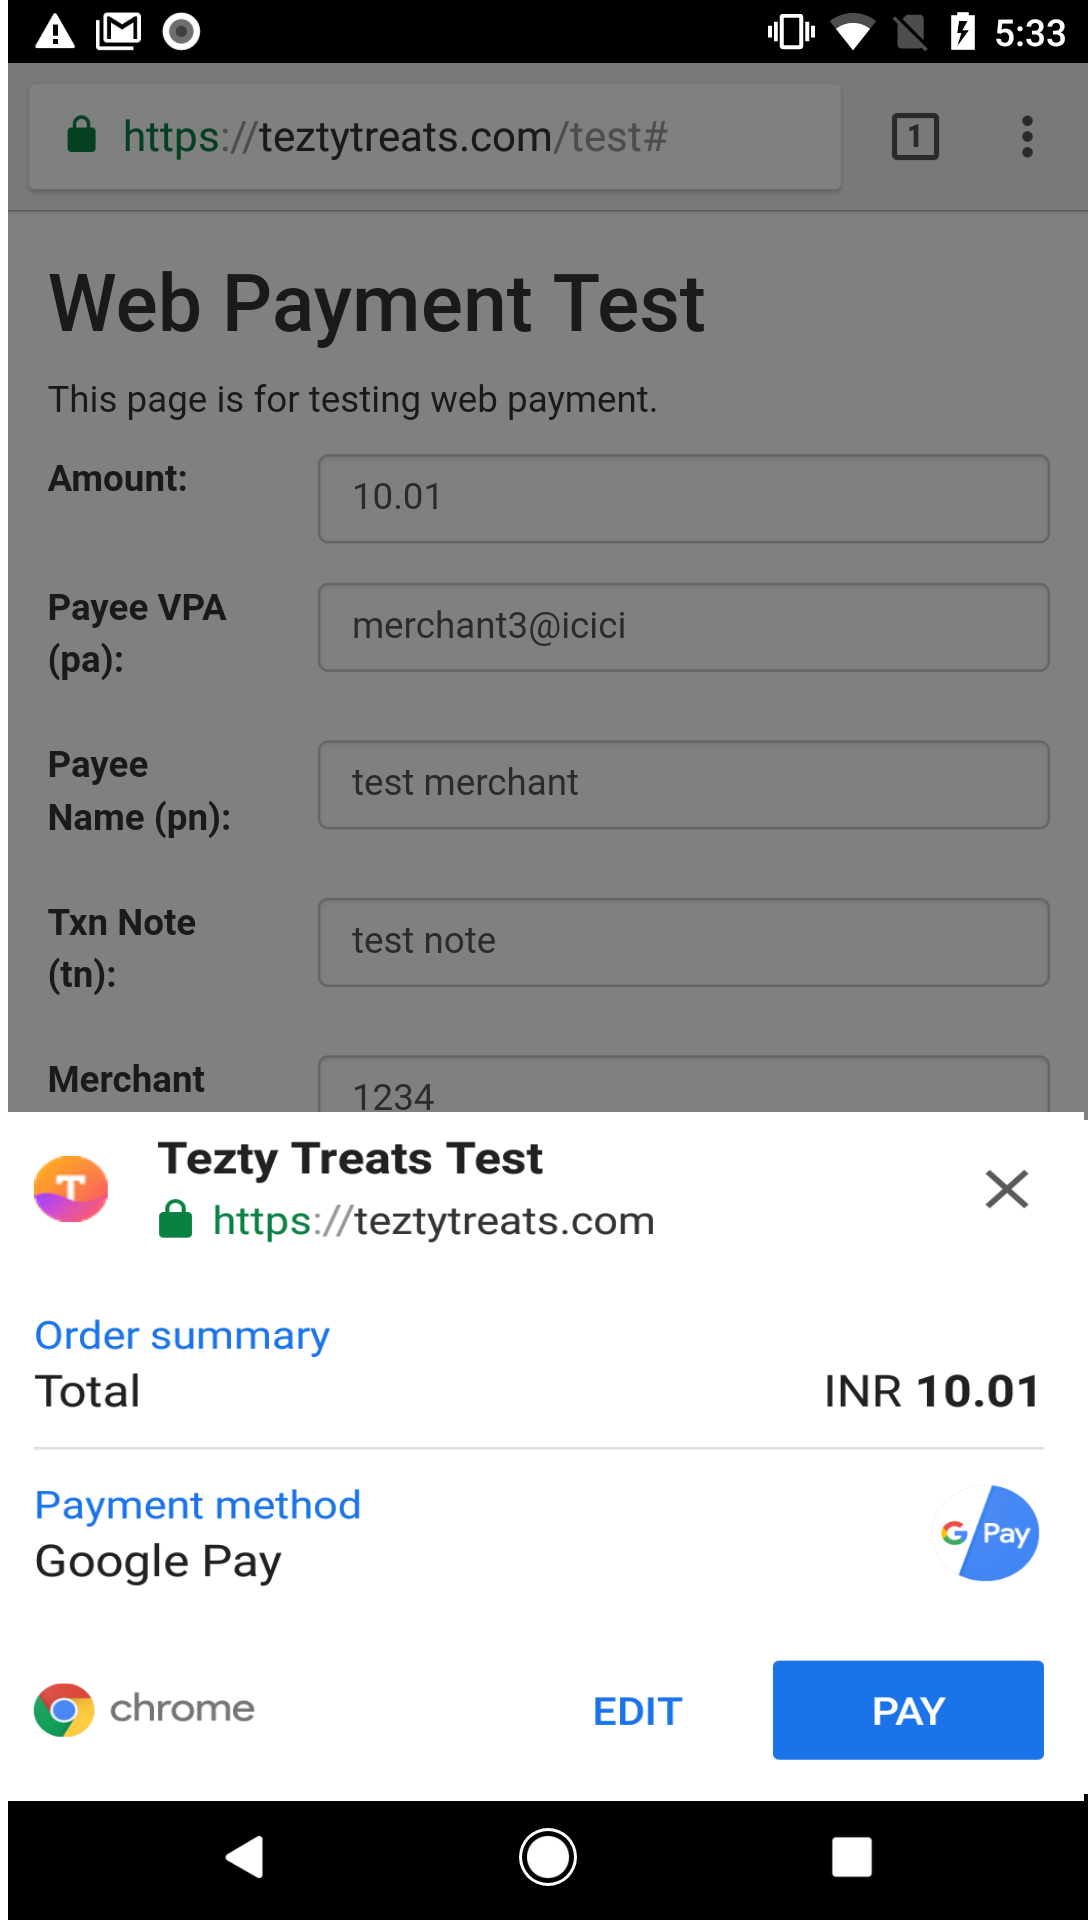 Select Google Pay for payment